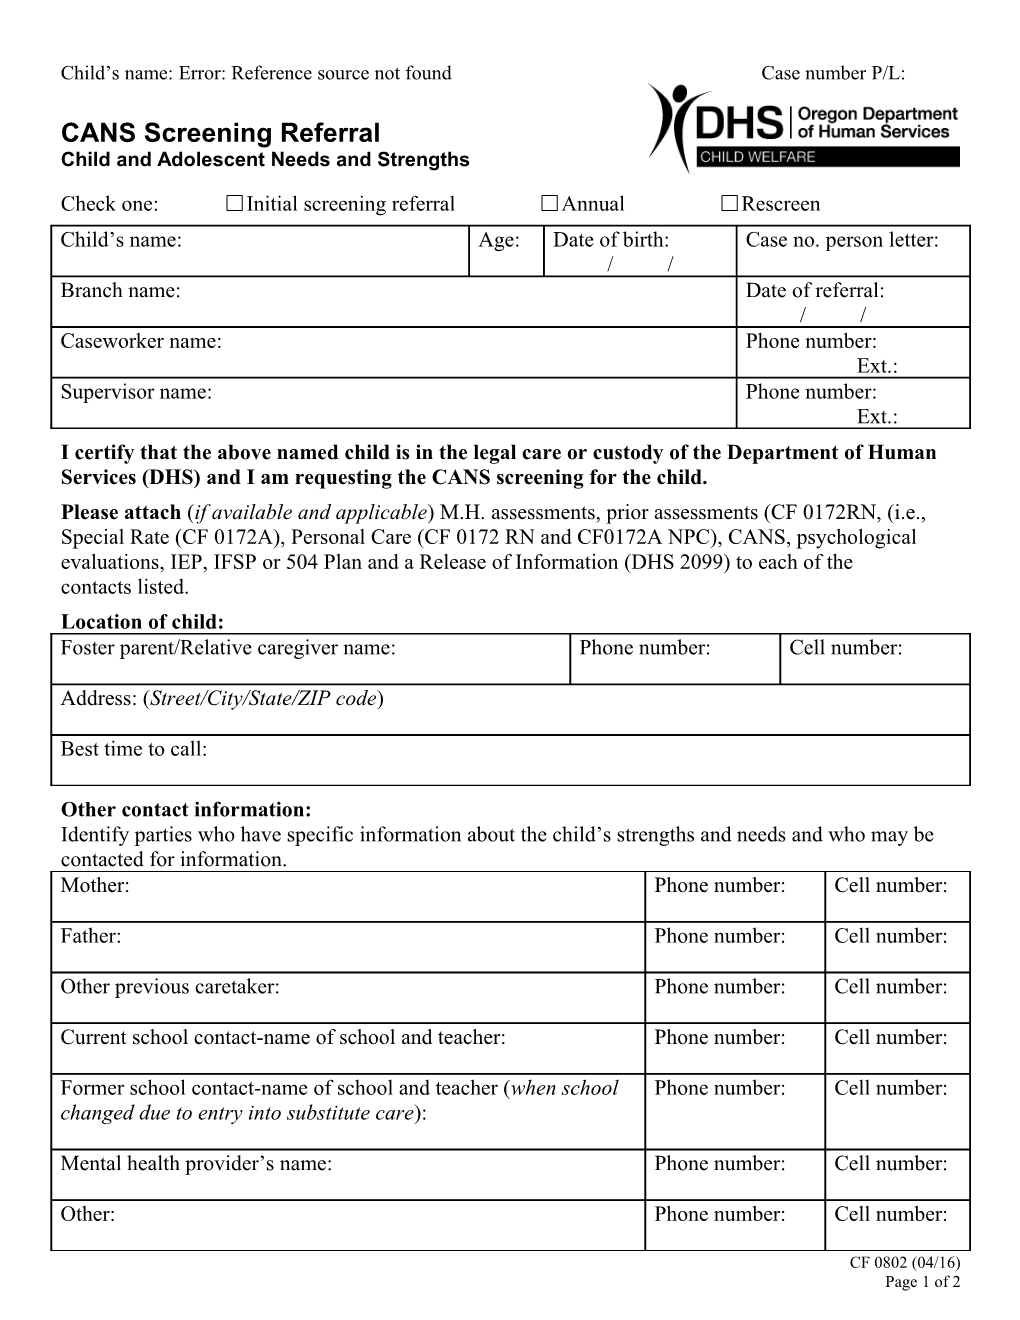 CANS Screening Referral Form - CF 802 4/10